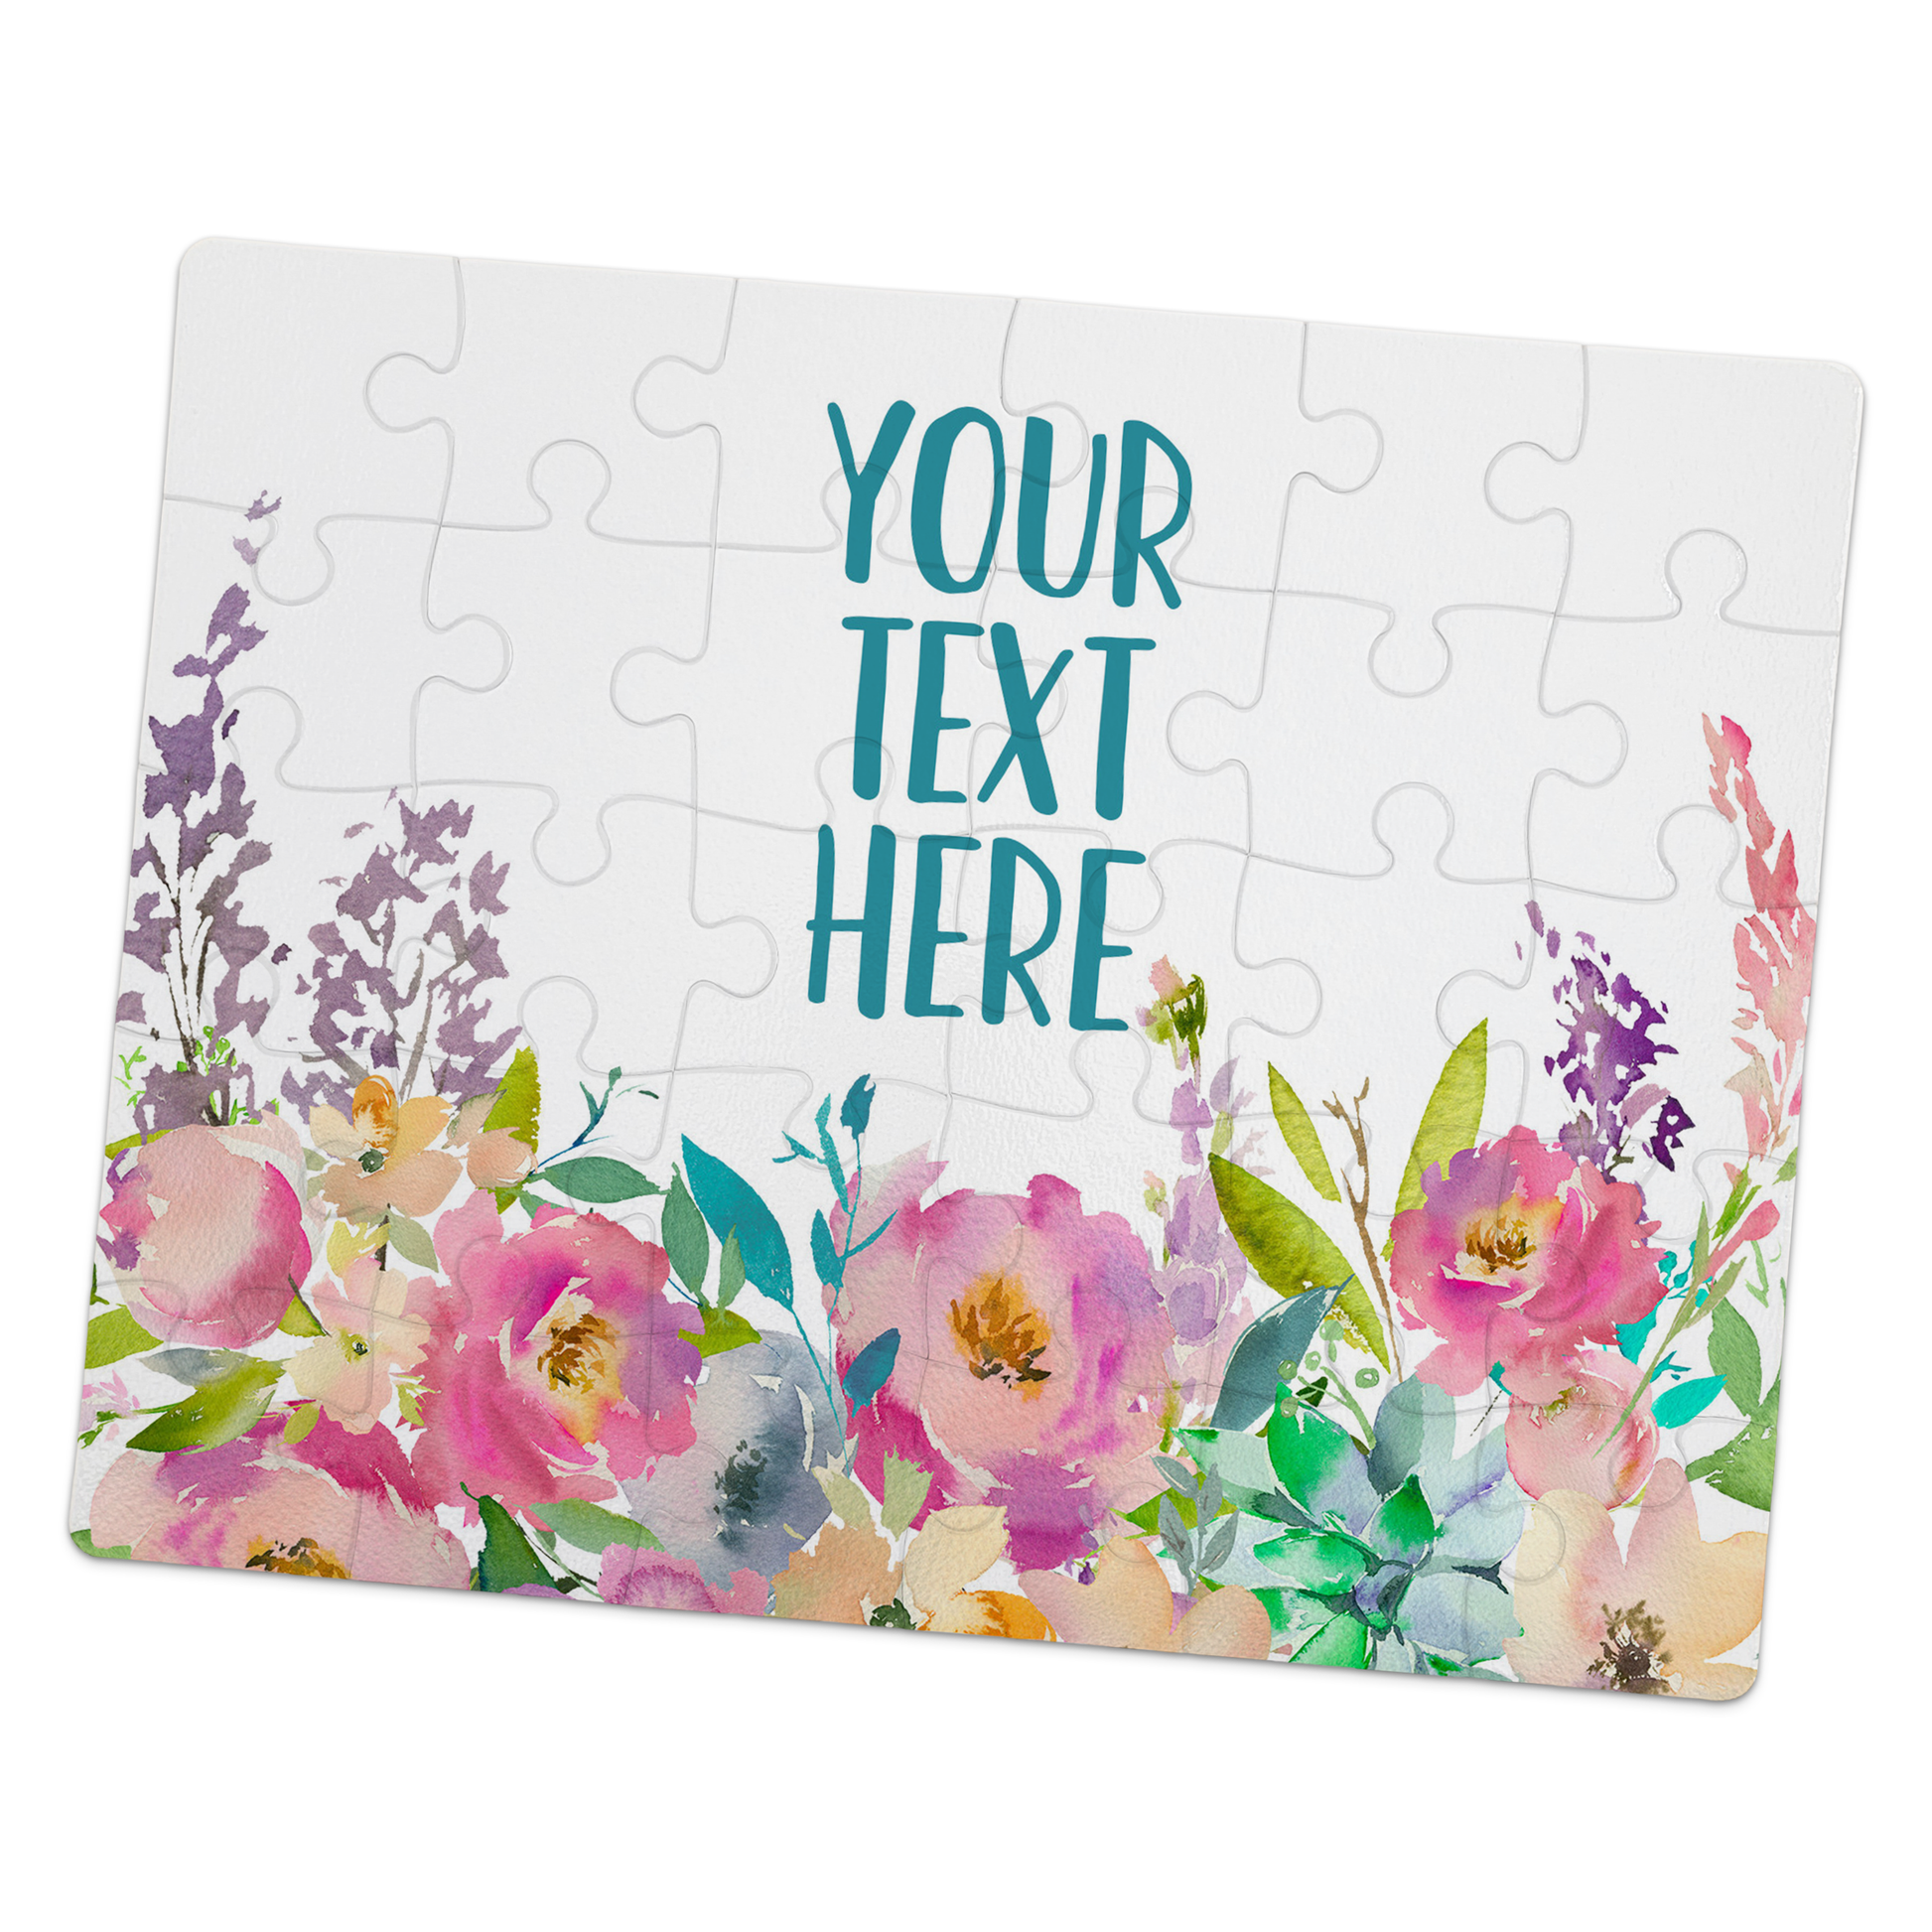 Create Your Own Puzzle - Floral Design - CYOP0150 | S'Berry Boutique